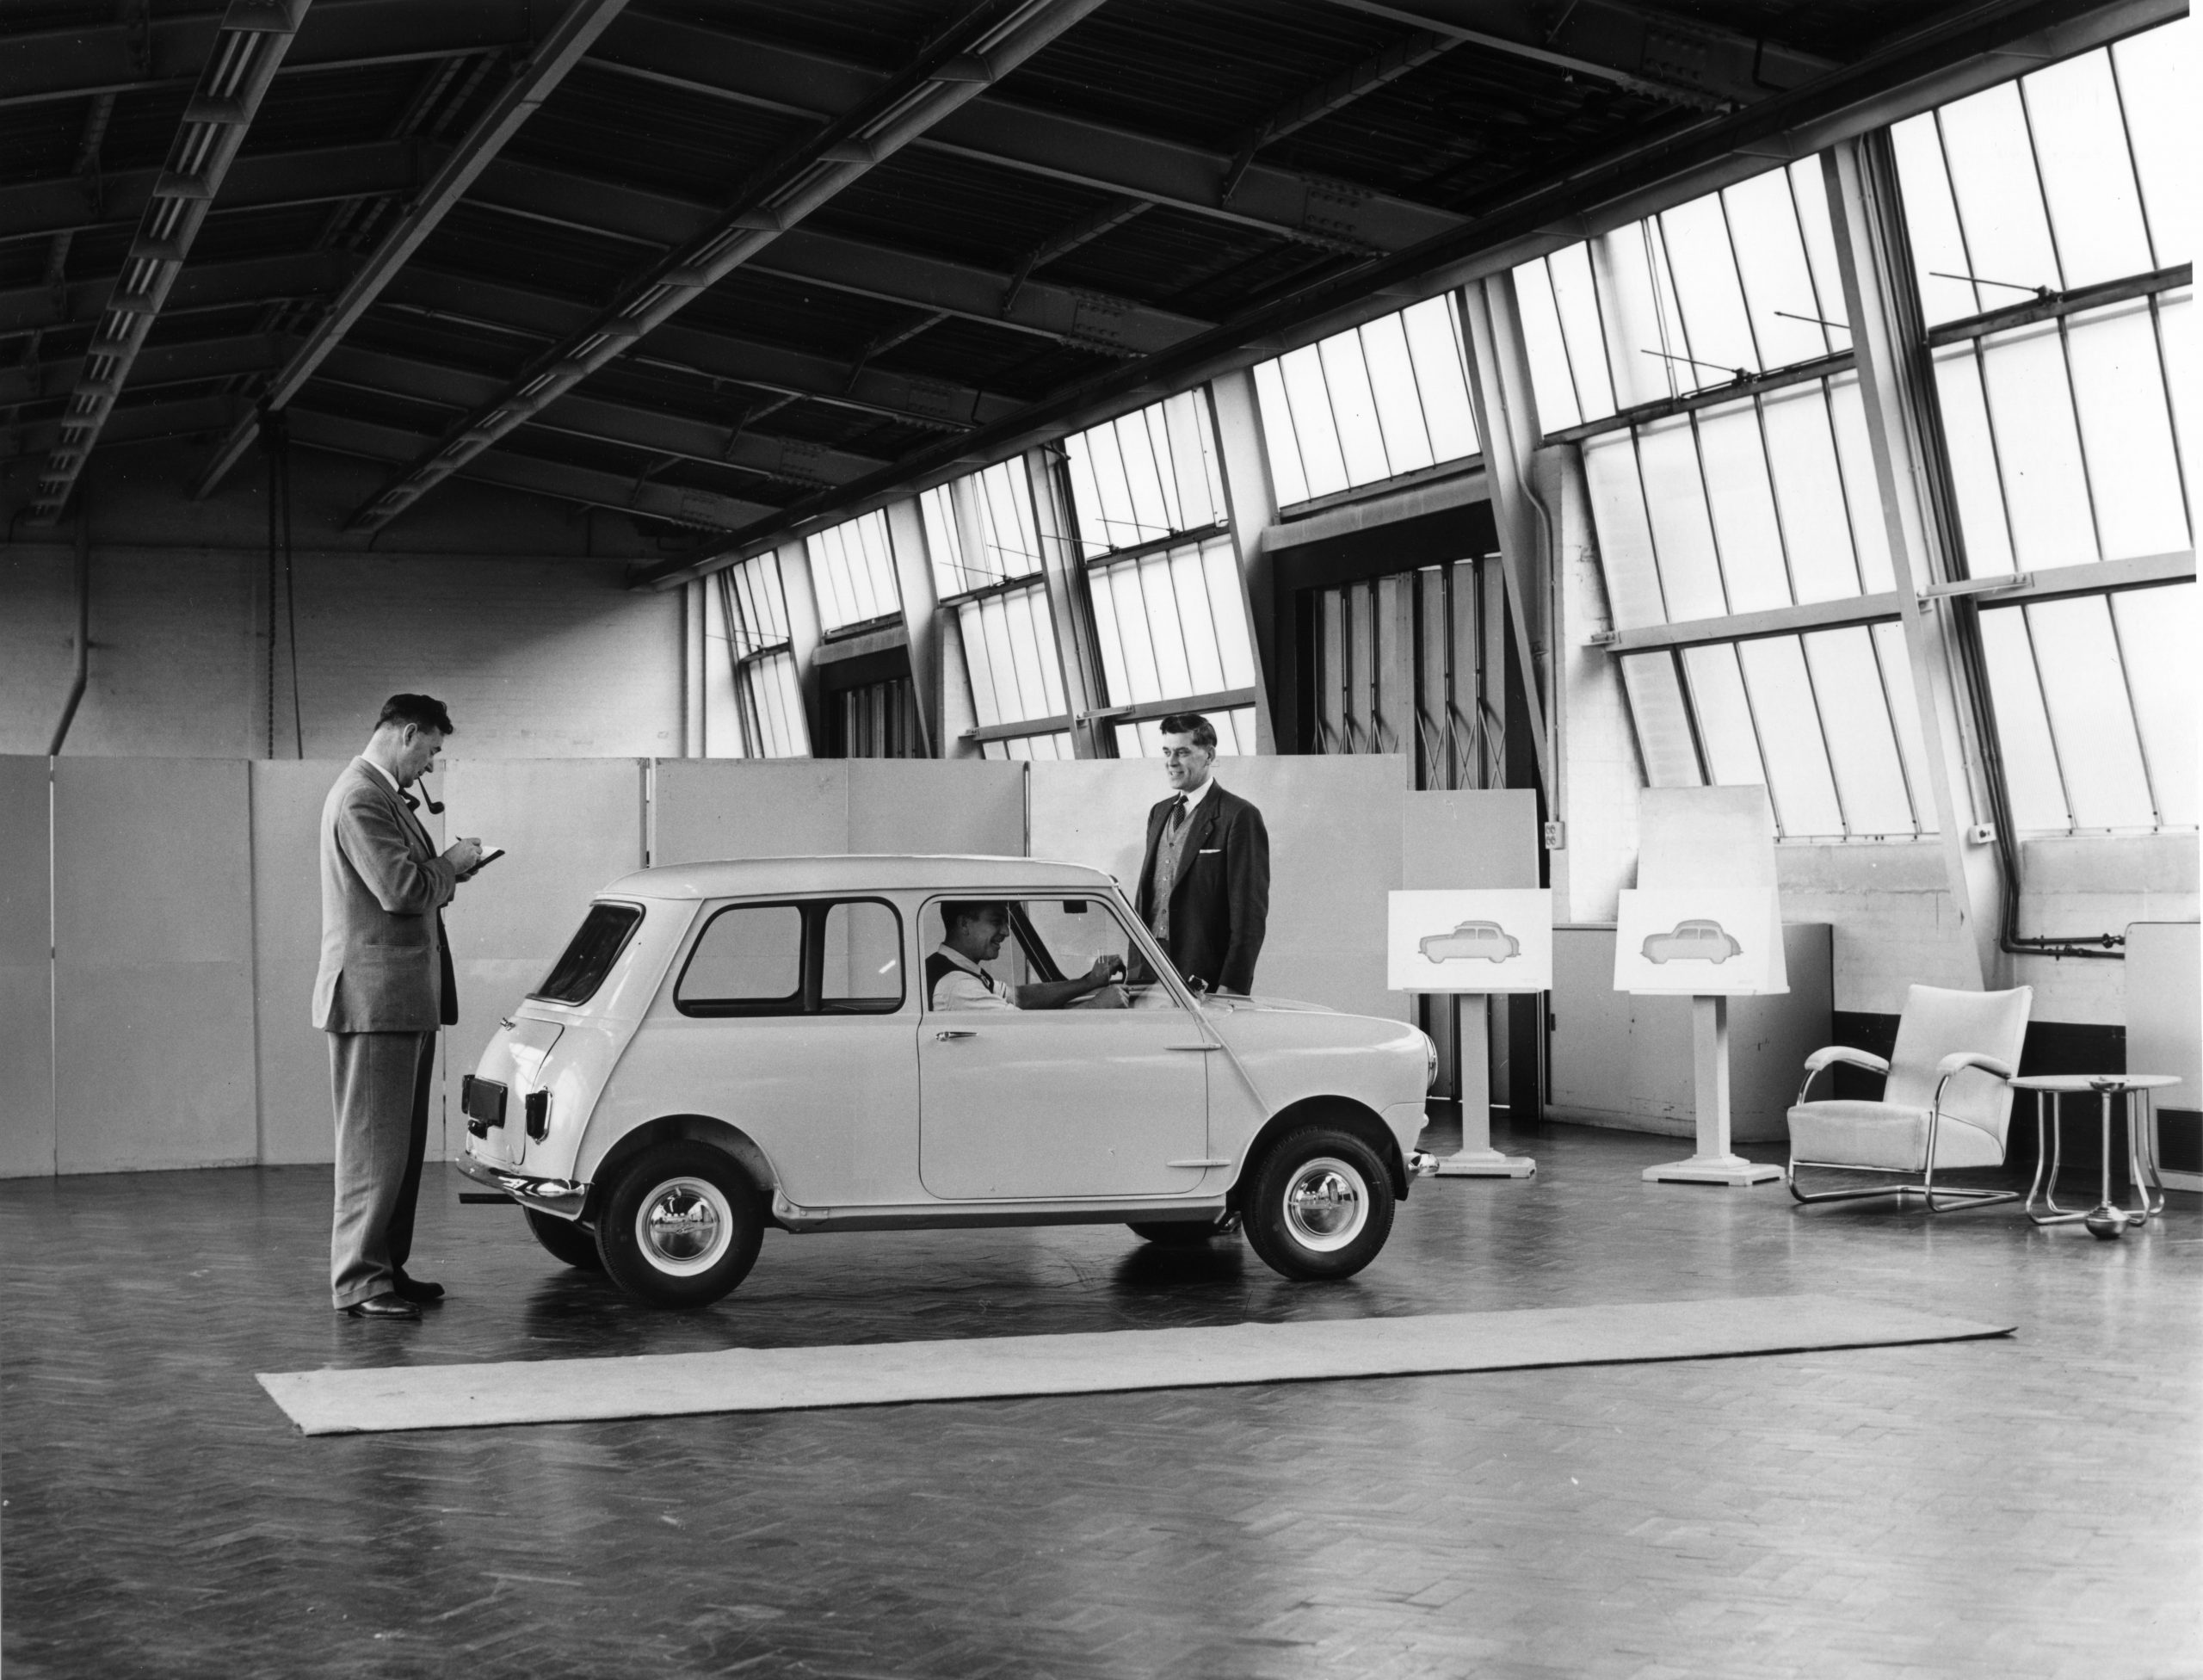 ADO 15 (Mini) 1959. In the Styling Studio at Longbridge being inspected by Jack Daniels. He is comparing it with a Morris Minor an Austin A35 which are on display nearby.